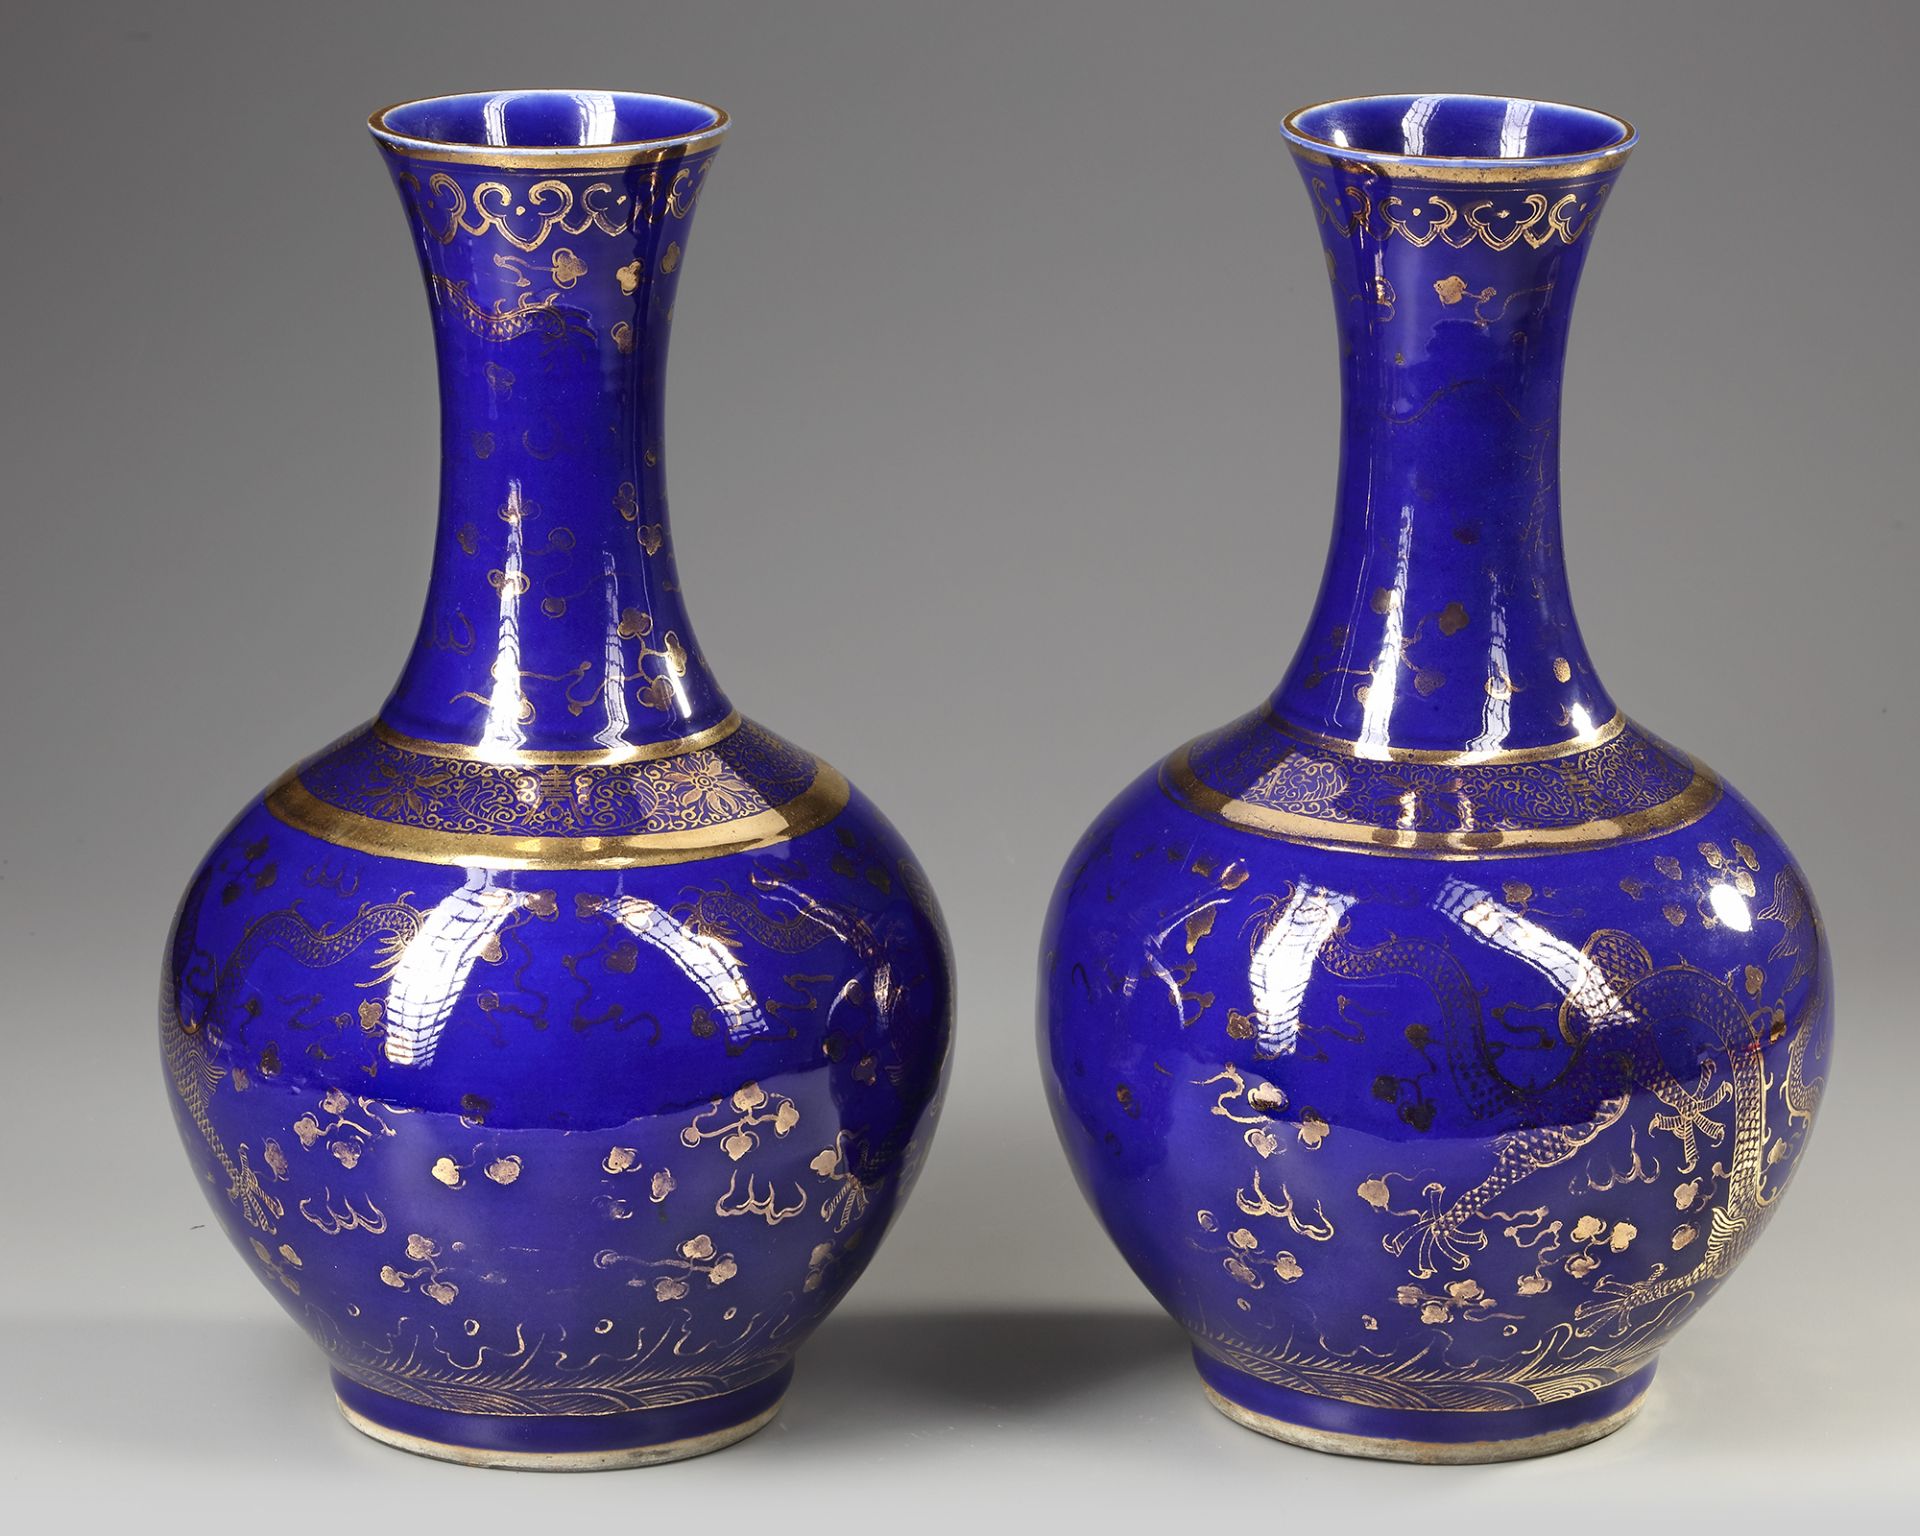 A PAIR OF CHINESE GILT POWDER-BLUE BOTTLE VASES, LATE 19TH-EARLY 20TH CENTURY - Bild 2 aus 4